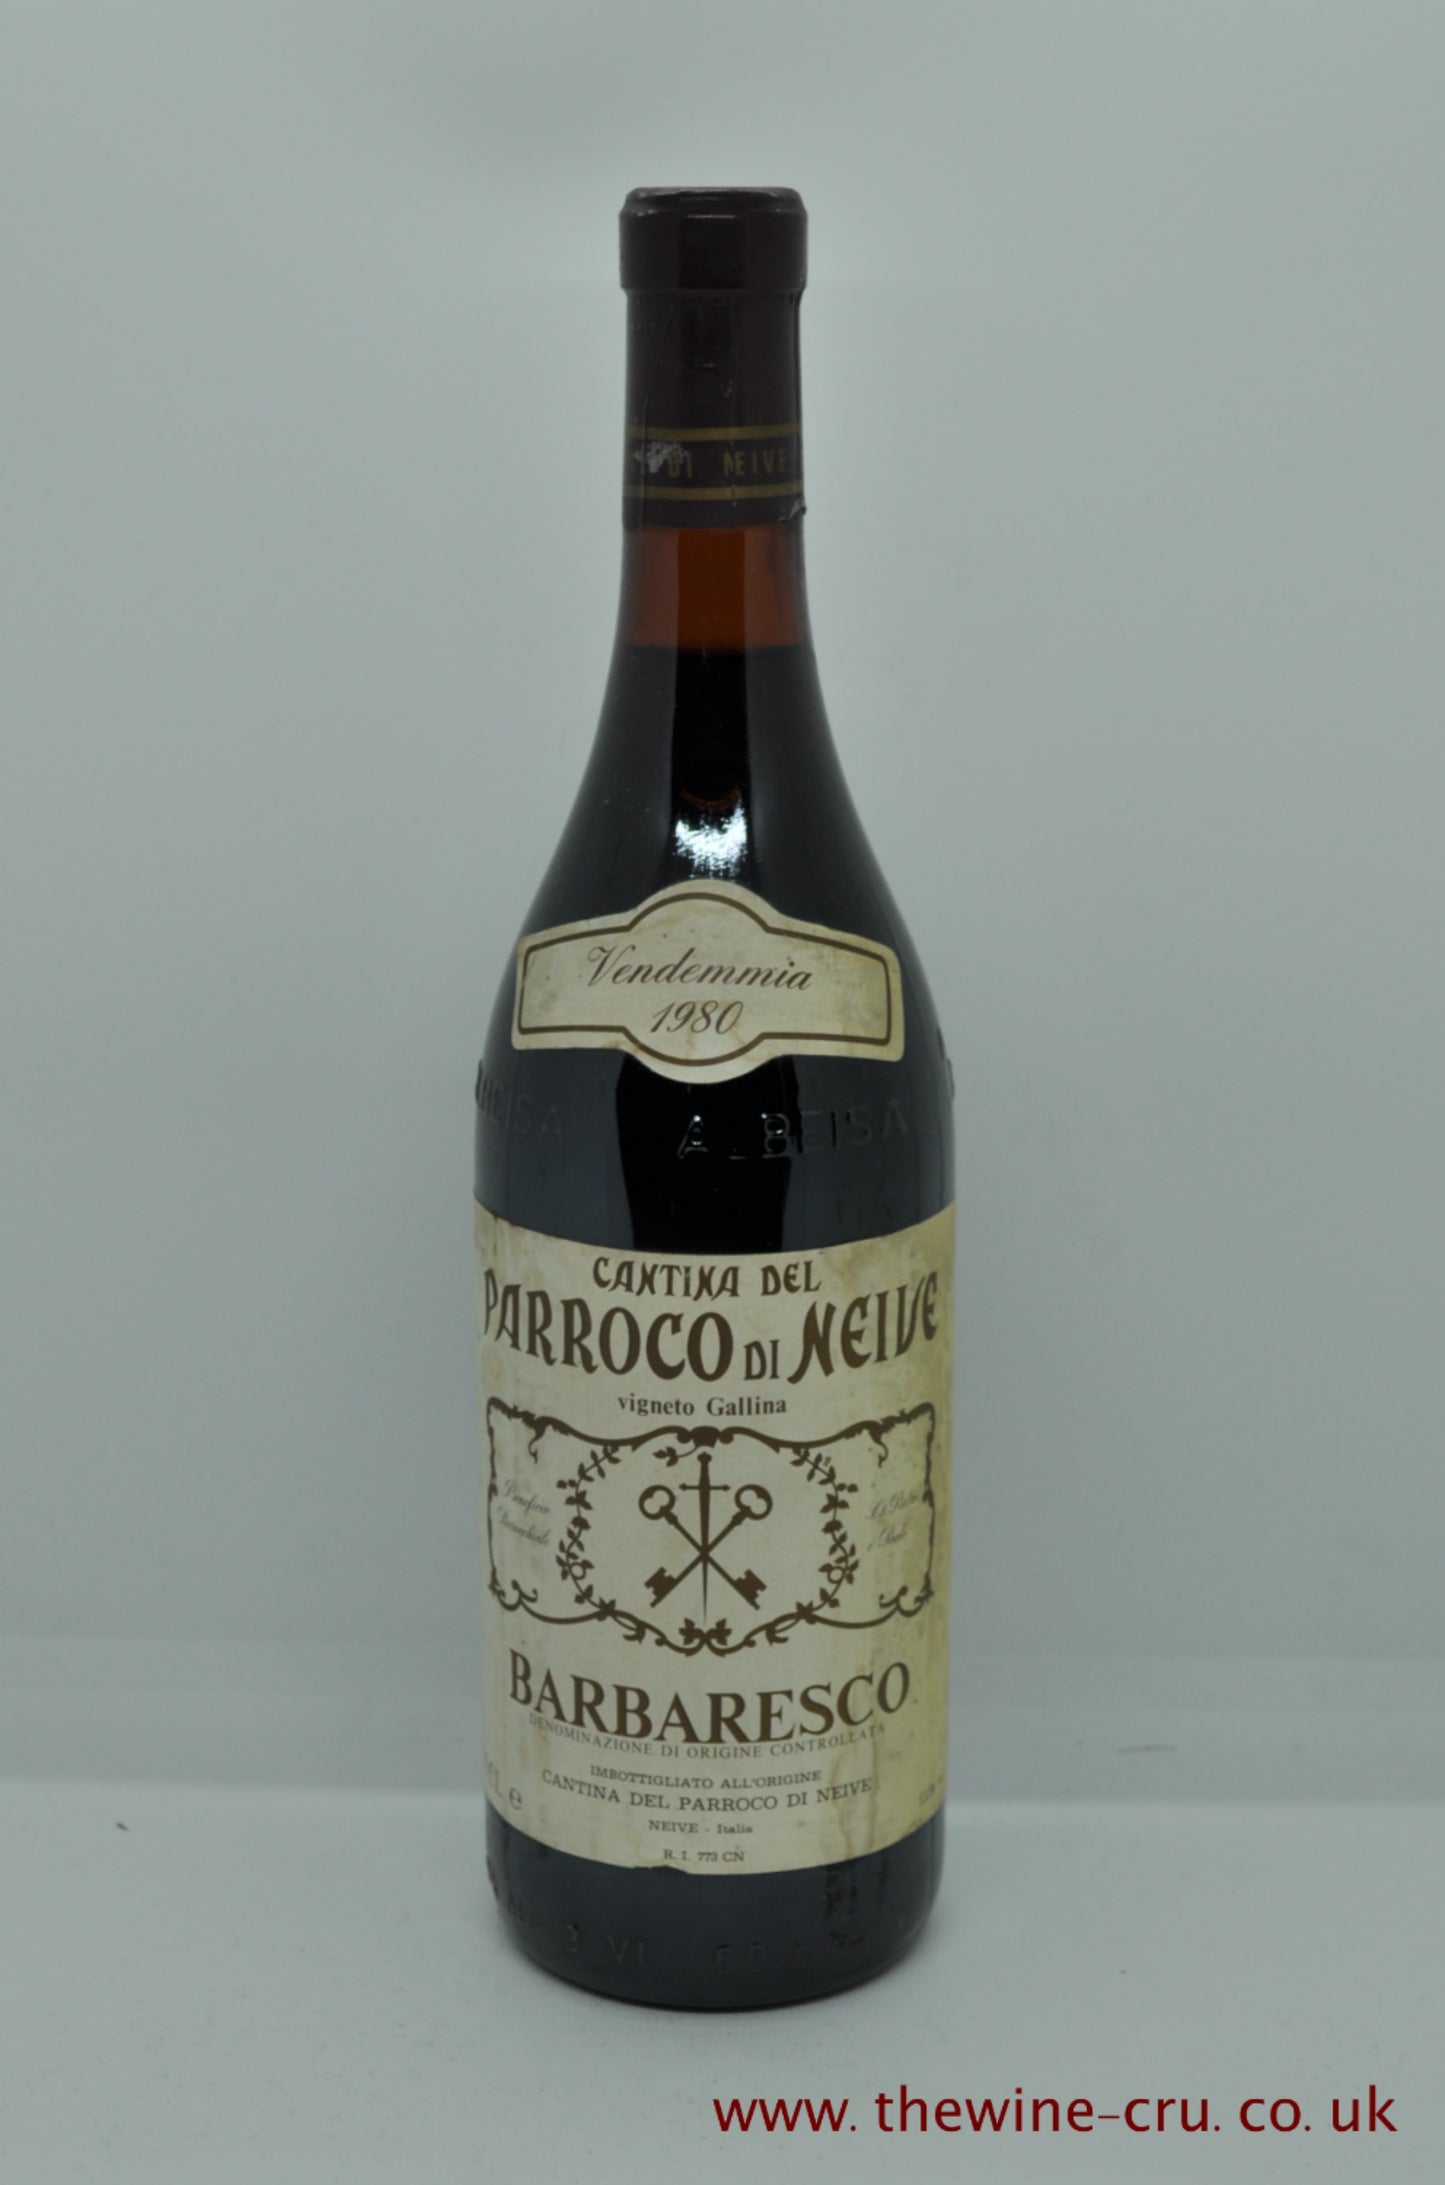 1980 vintage red wine. Barbaresco Parroco Di Neive. Italy. The bottle is in good condition with the wine level being 2cm below base of cork. Immediate delivery. Free local delivery. Gift wrapping available.